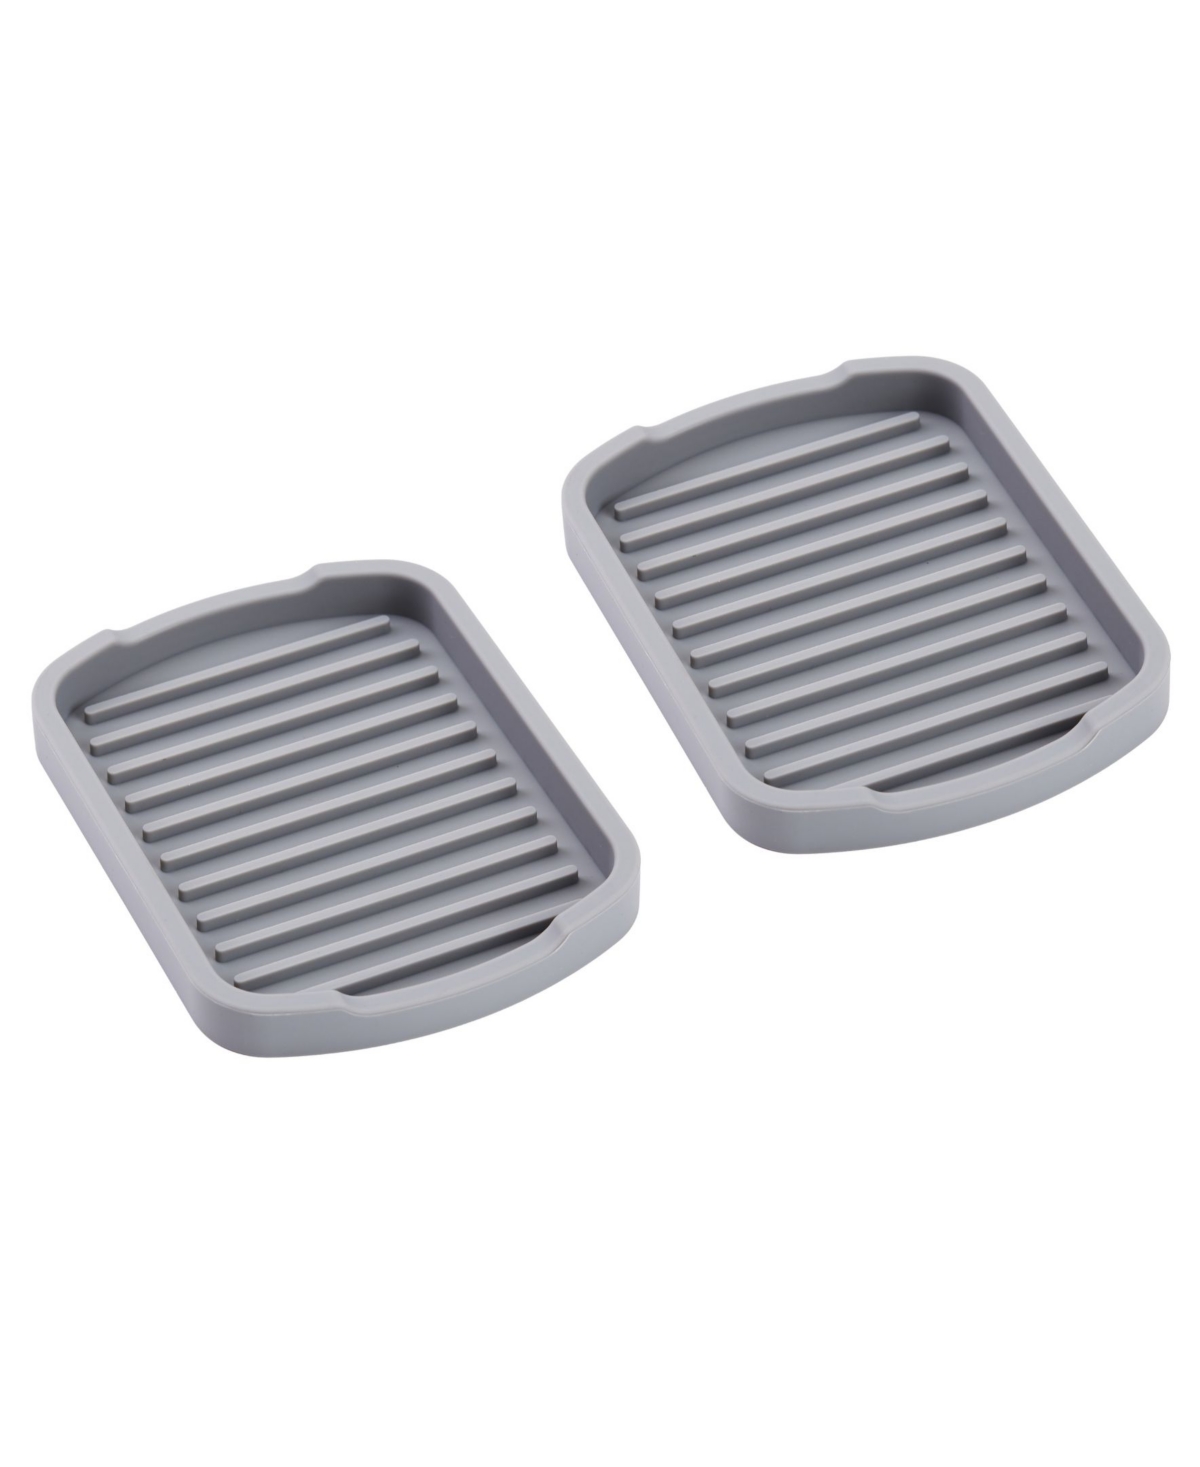 Cheer Collection Silicone Soap Tray, Small, 2 Pack In Gray